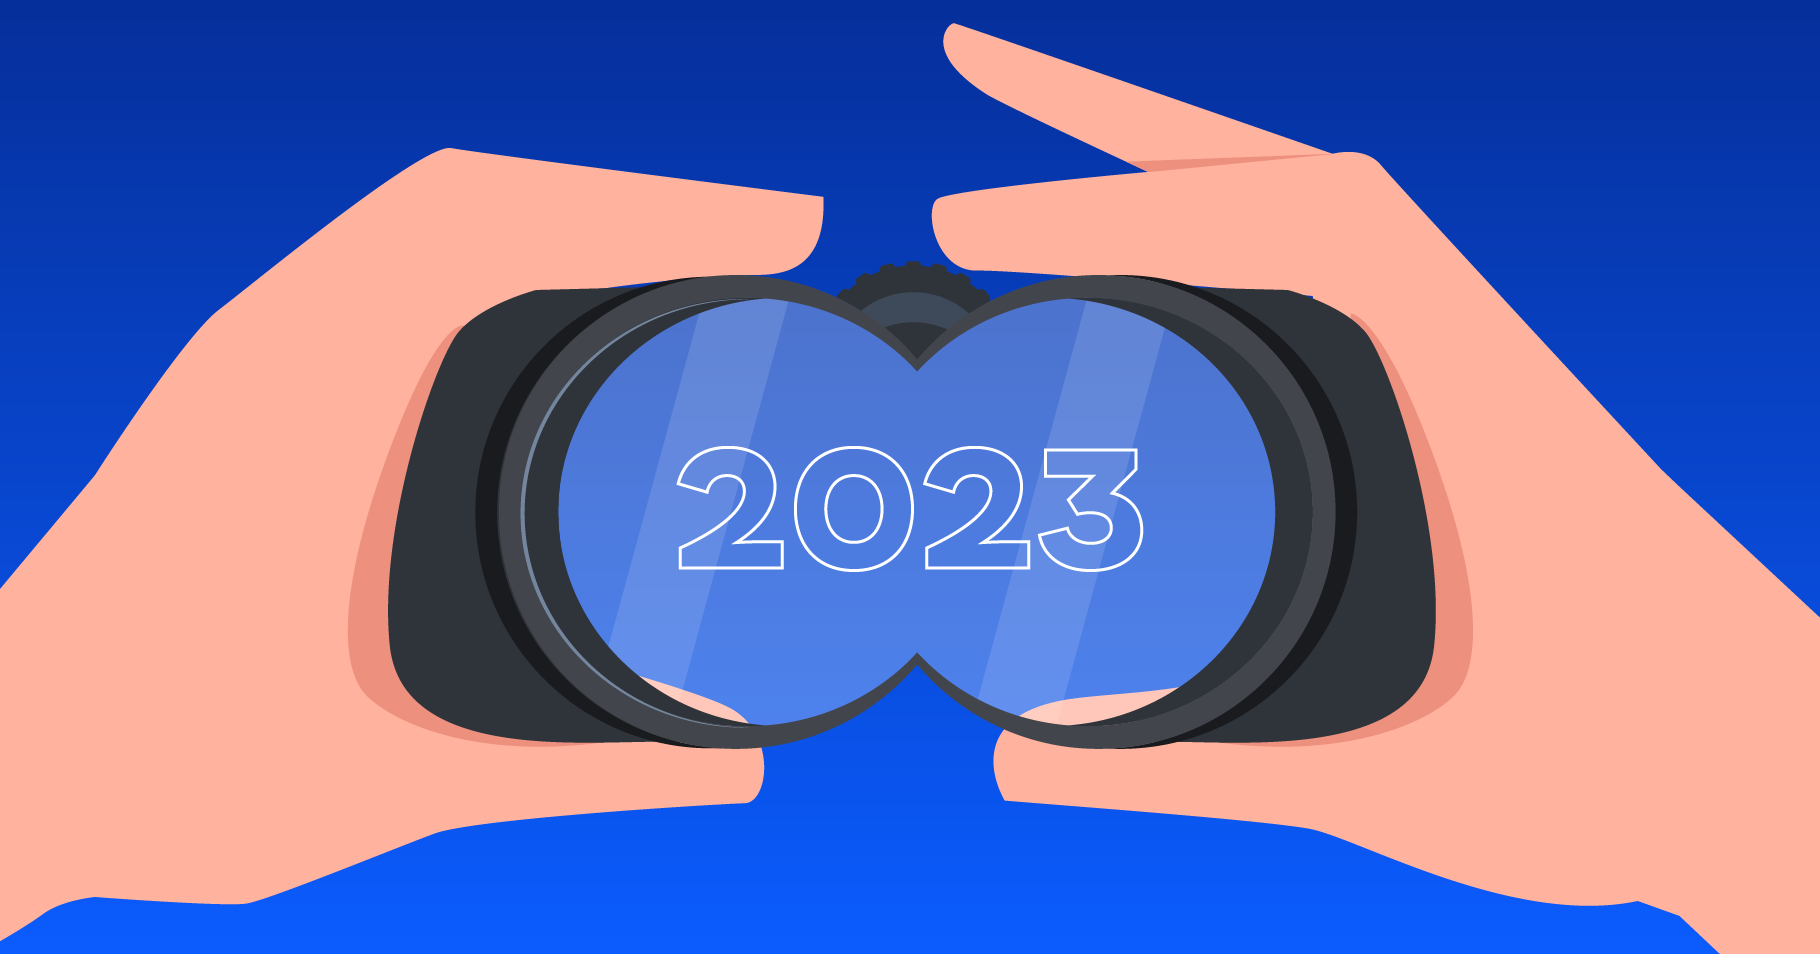 4 Predictions For Work In 2023